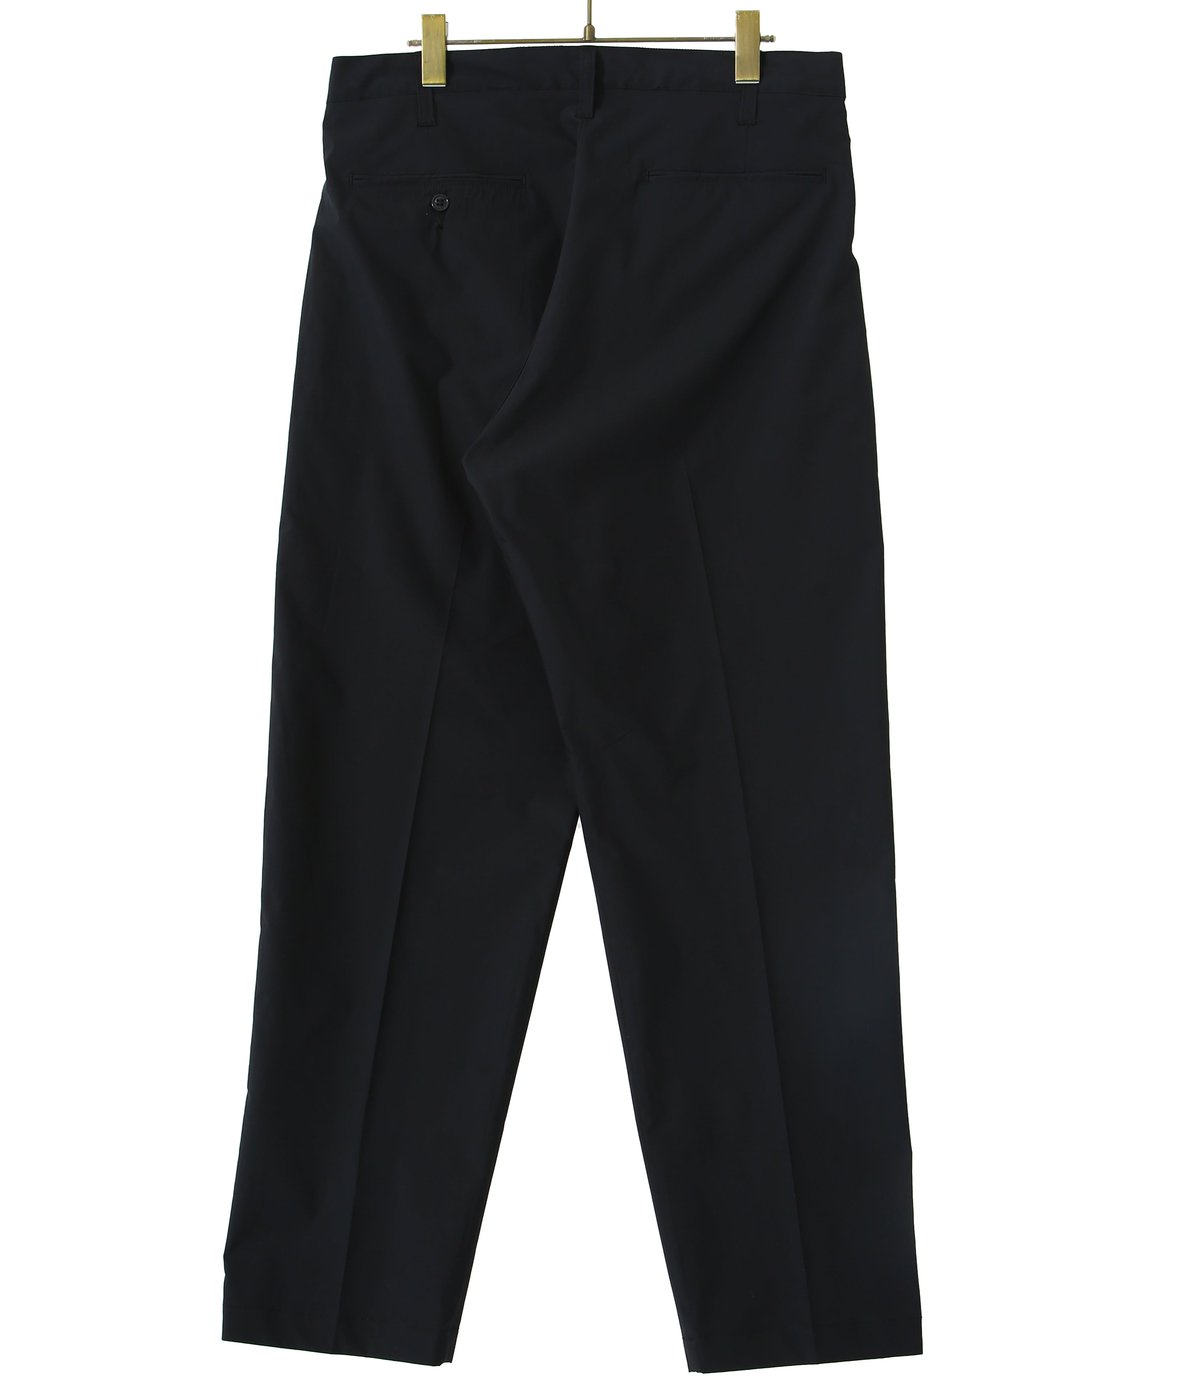 STRETCH WEATHER CLOTH OFFICER PANTS